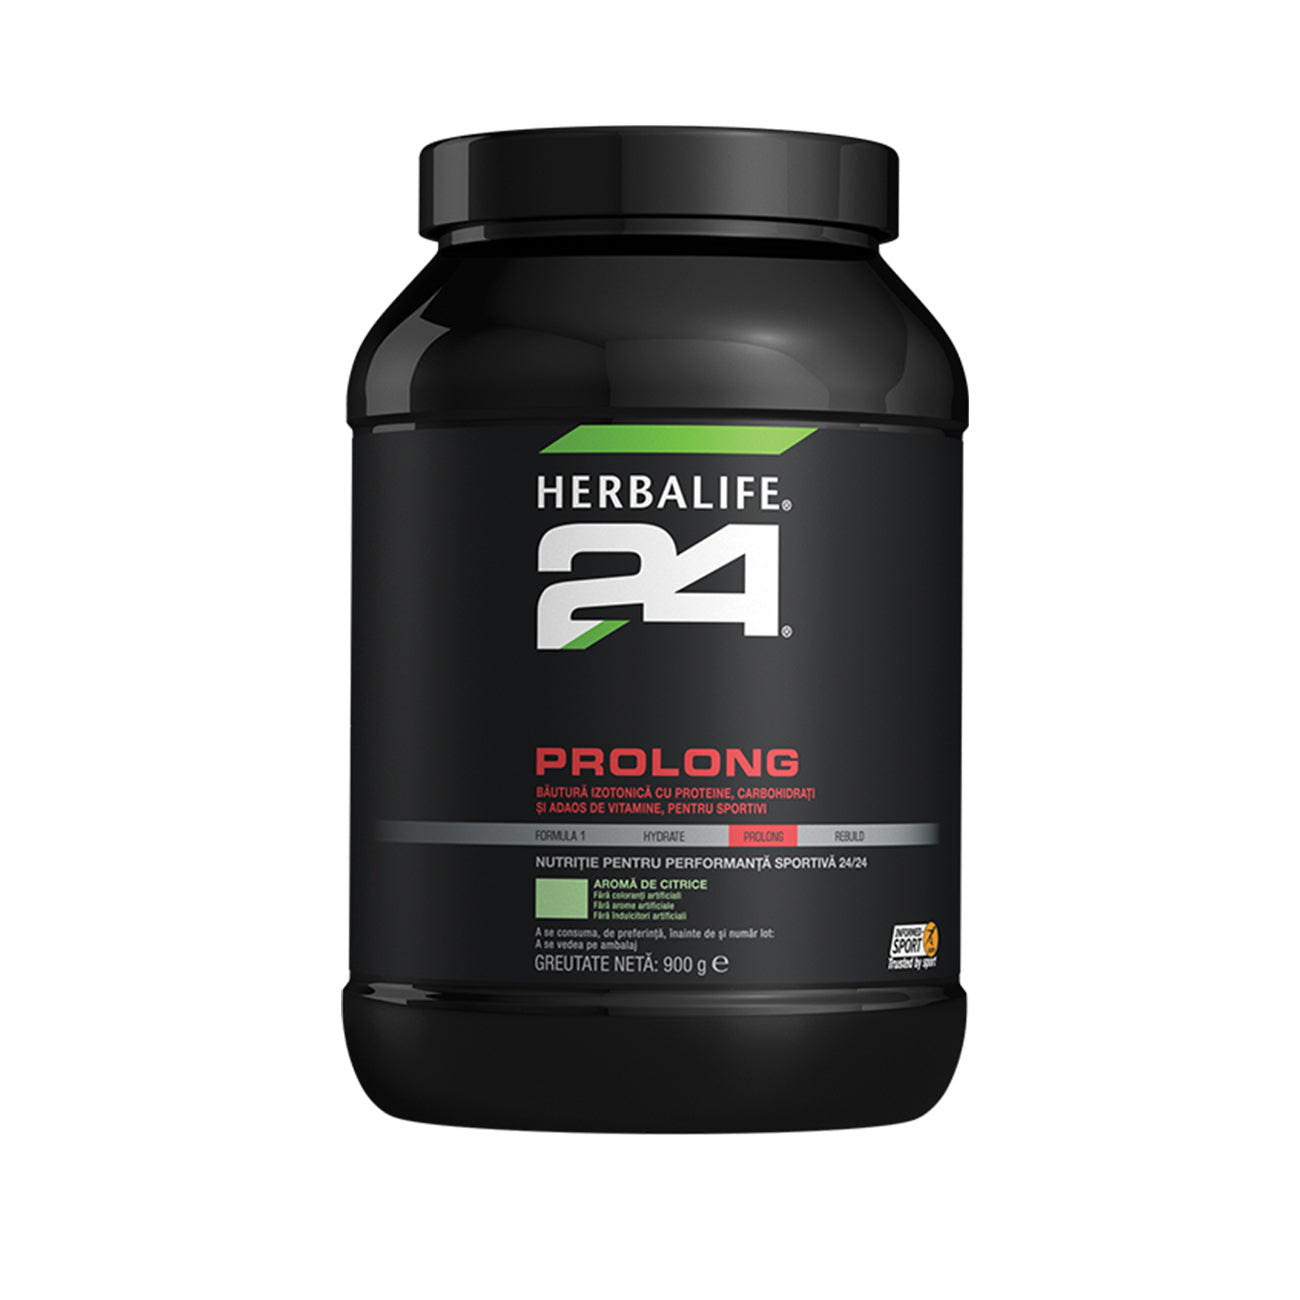 Herbalife H24 Prolong Bautura Carbo-Proteica Citrice